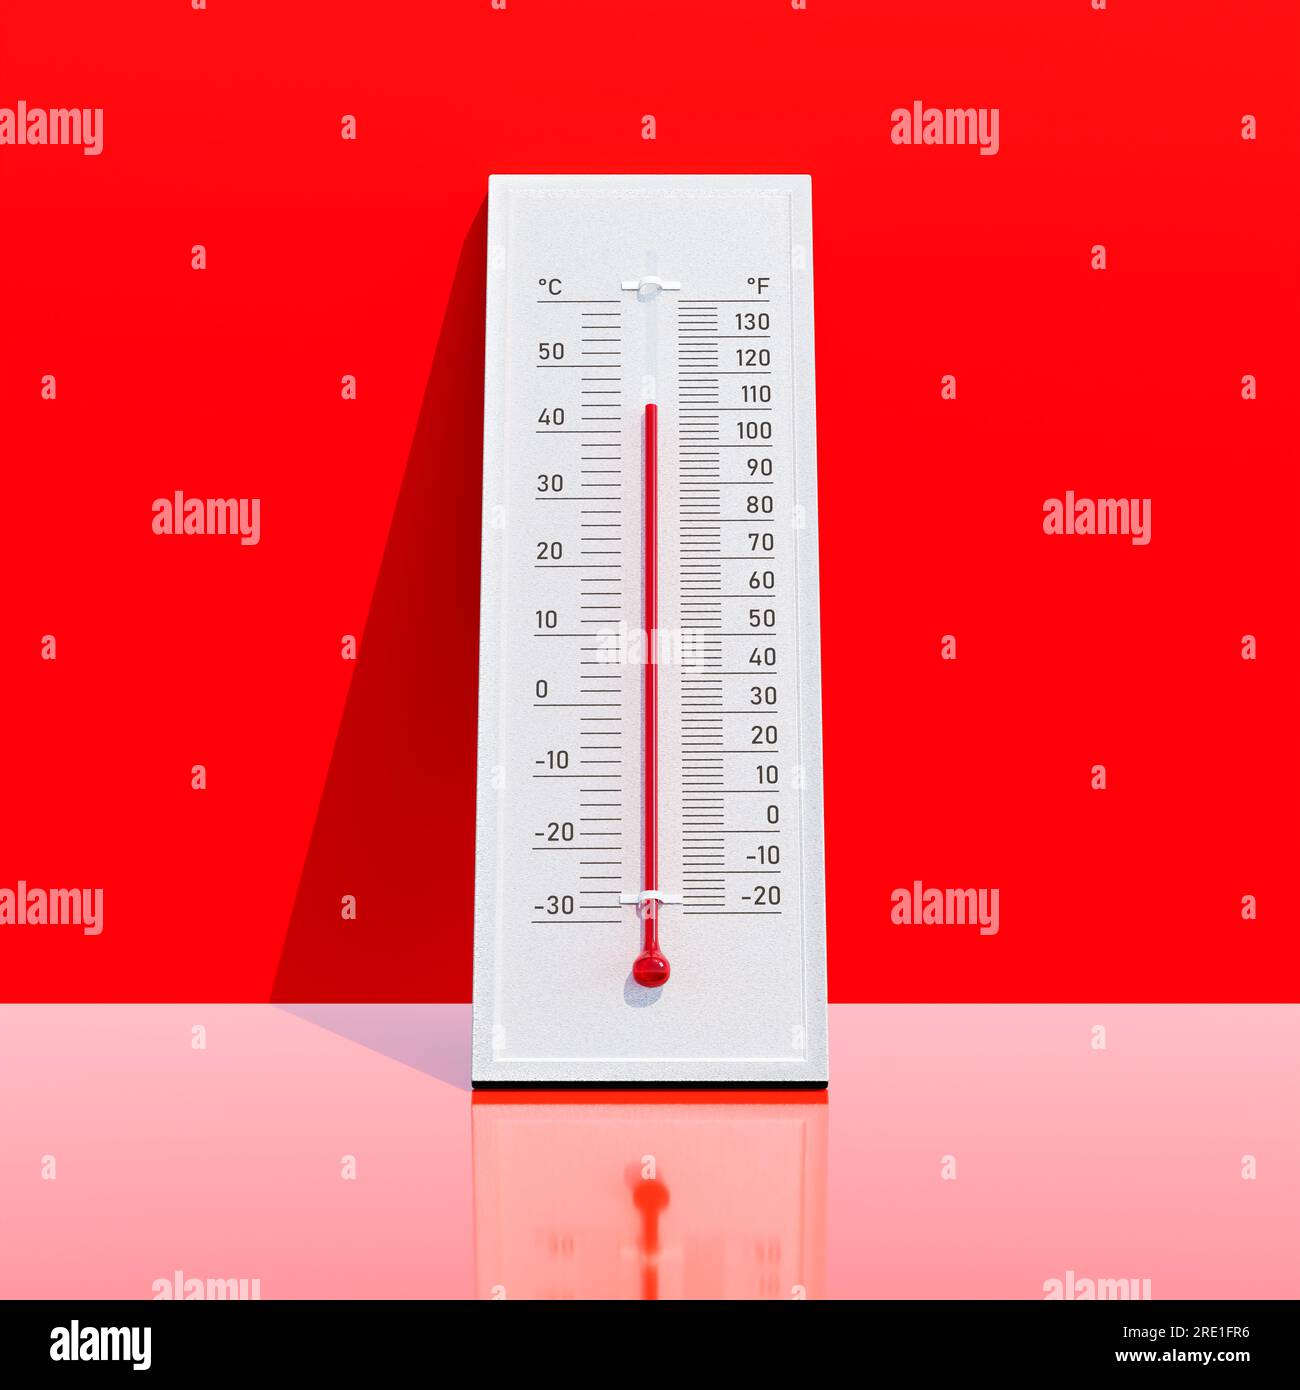 https://c8.alamy.com/comp/2RE1FR6/heat-wave-concept-a-thermometer-showing-44-celsius-110-fahrenheit-leaning-onto-a-red-background-with-hard-shadows-and-reflection-2RE1FR6.jpg